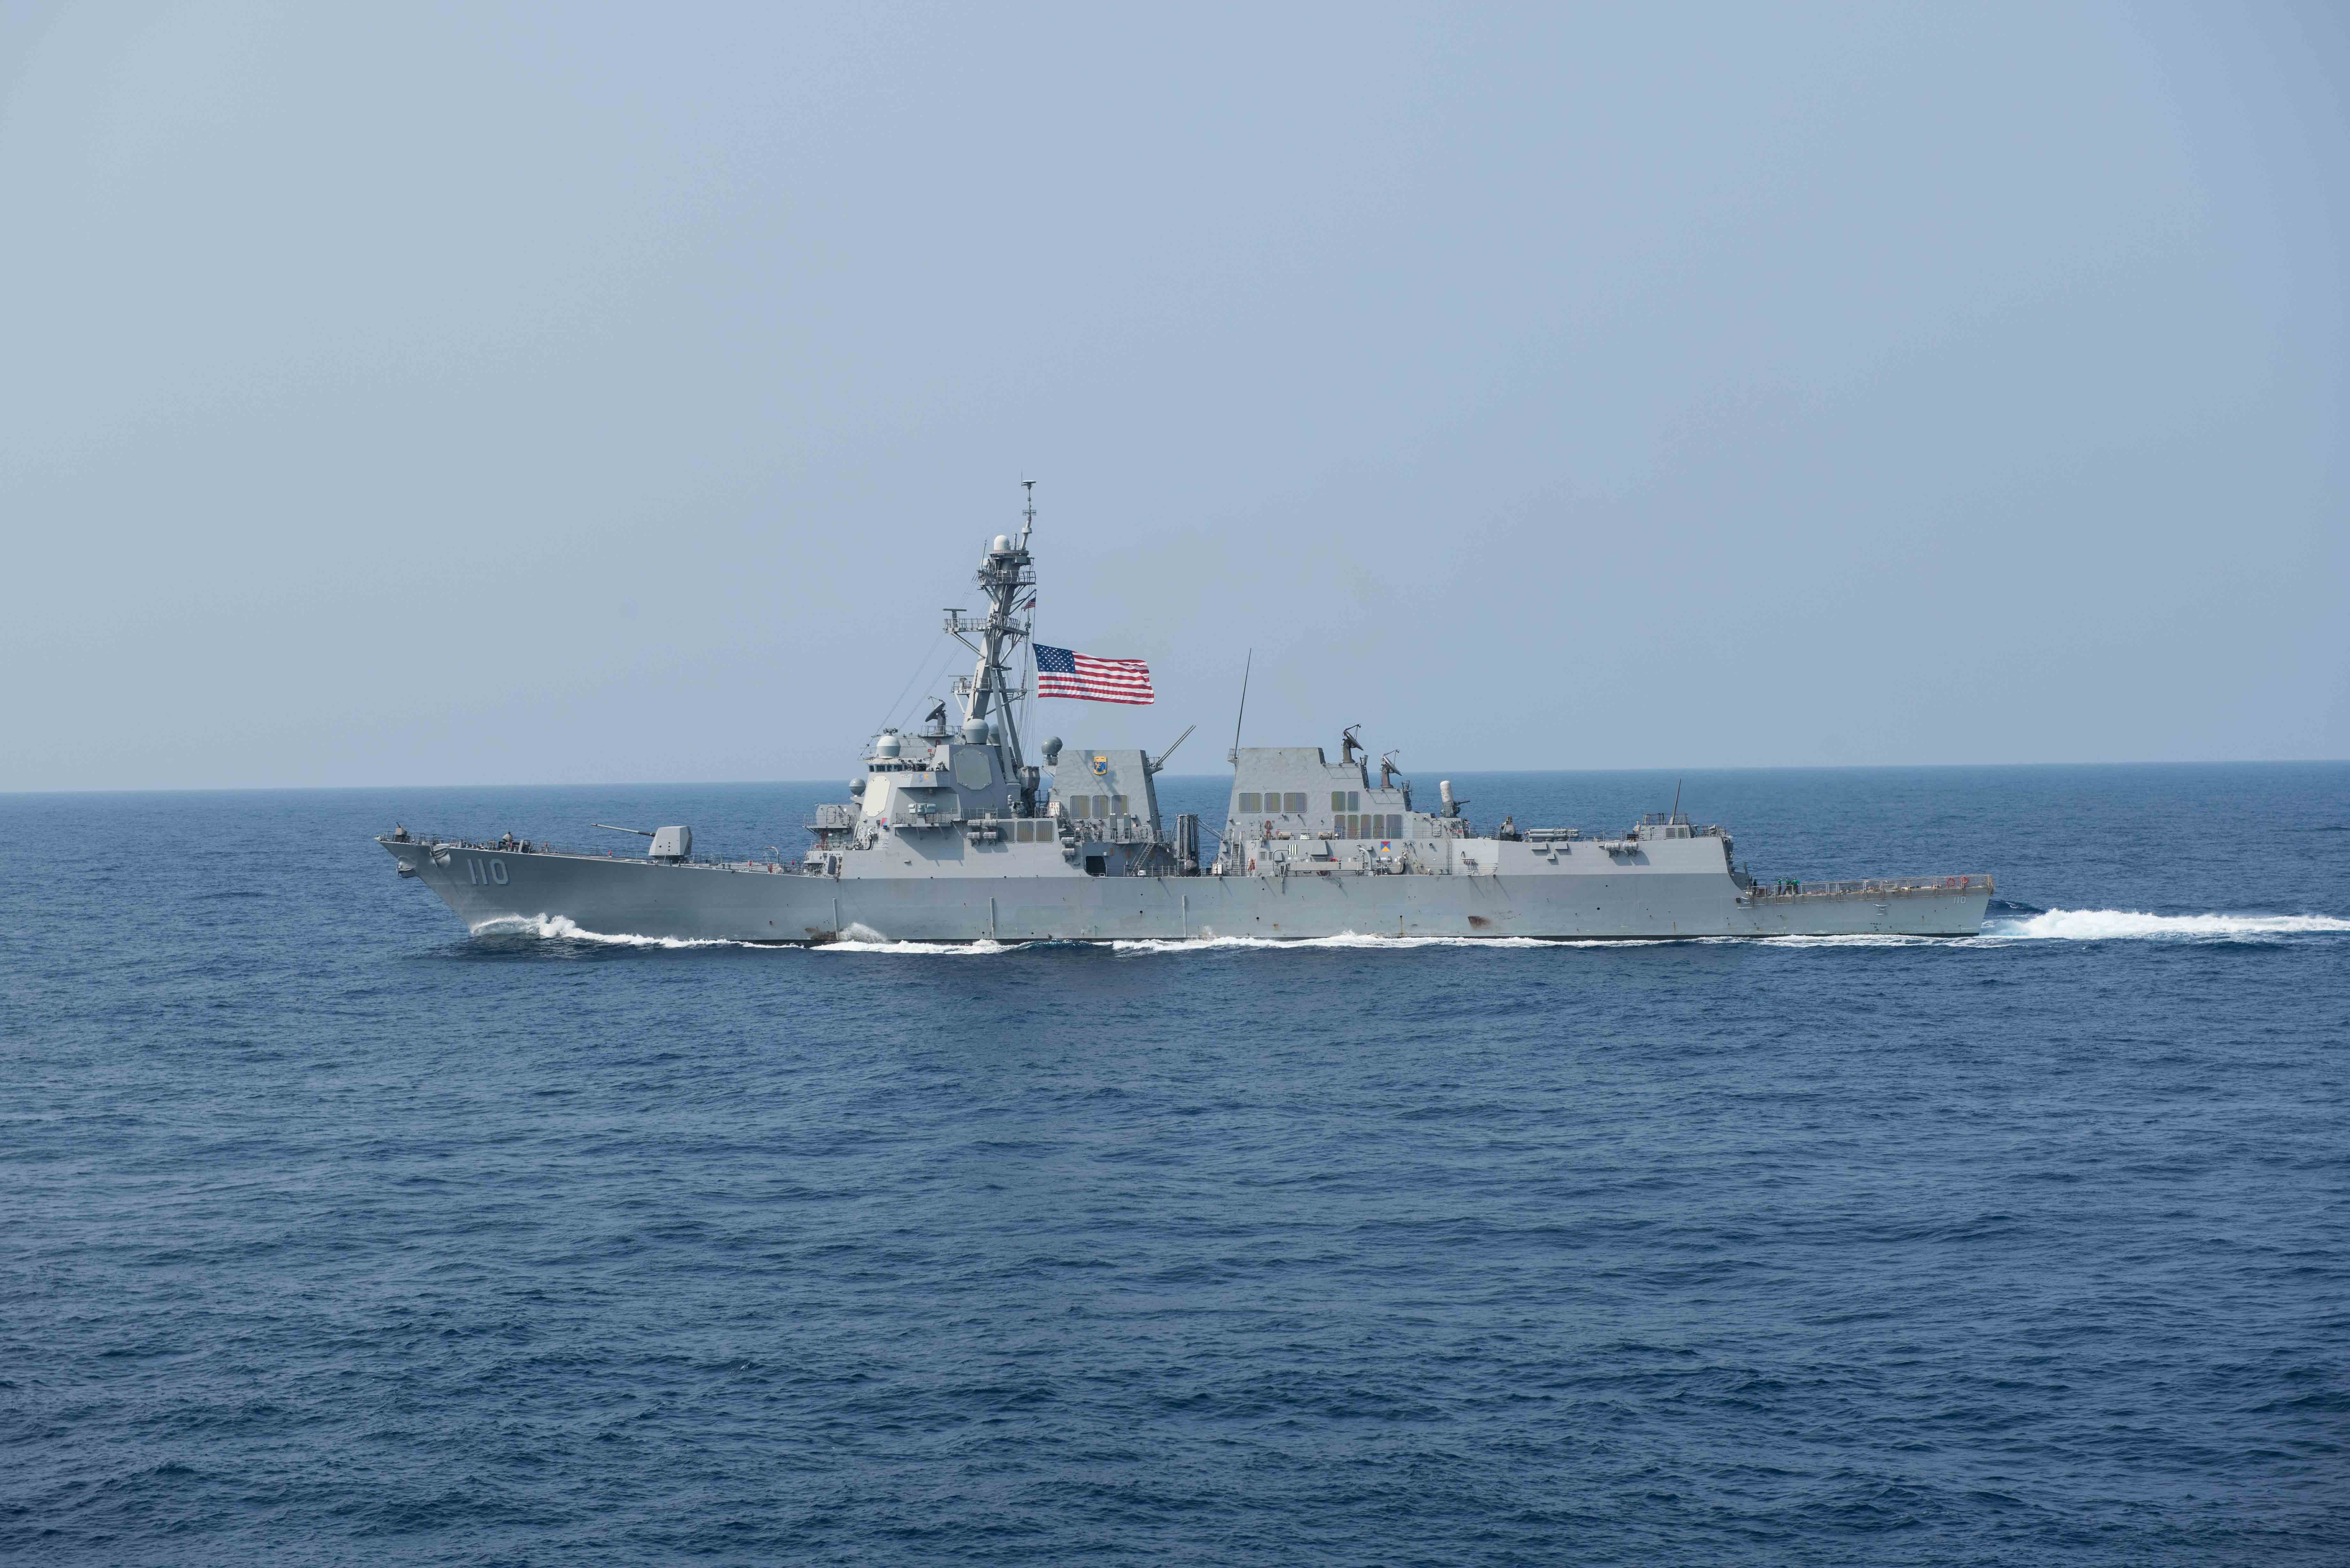 USS William P. Lawrence (DDG-110) transits the Philippine Sea on March 30, 2016, US Navy Photo 